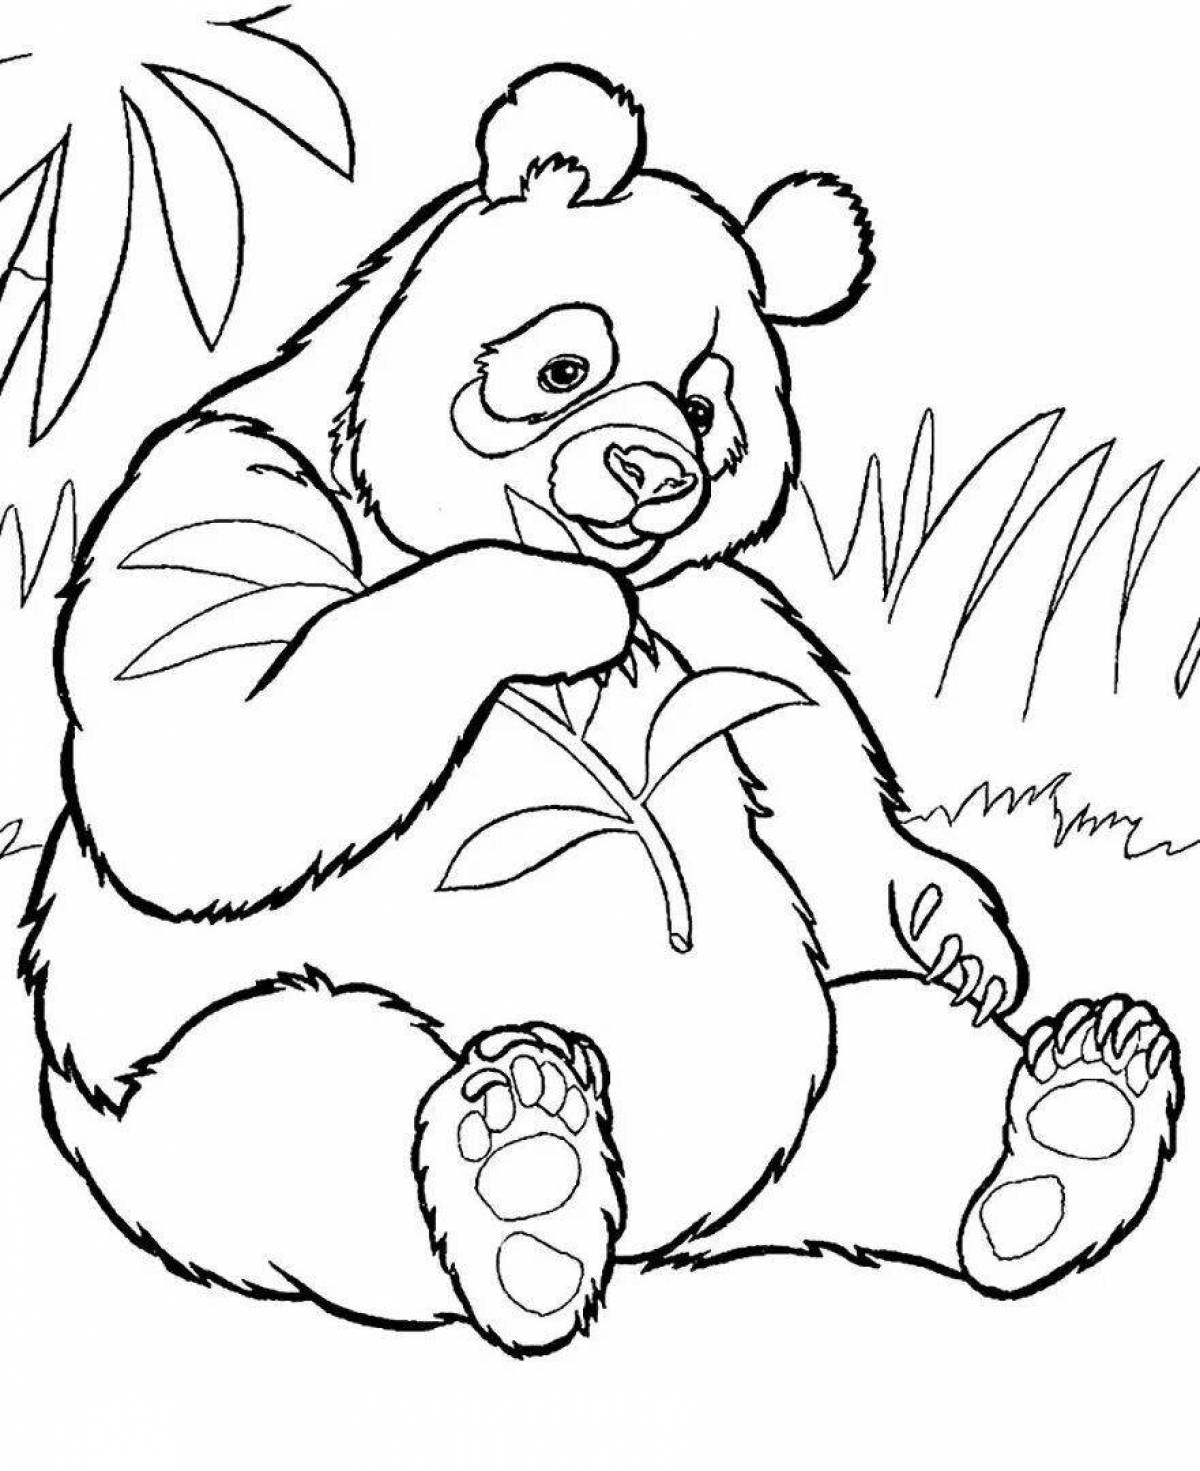 Coloring fairy panda with bamboo